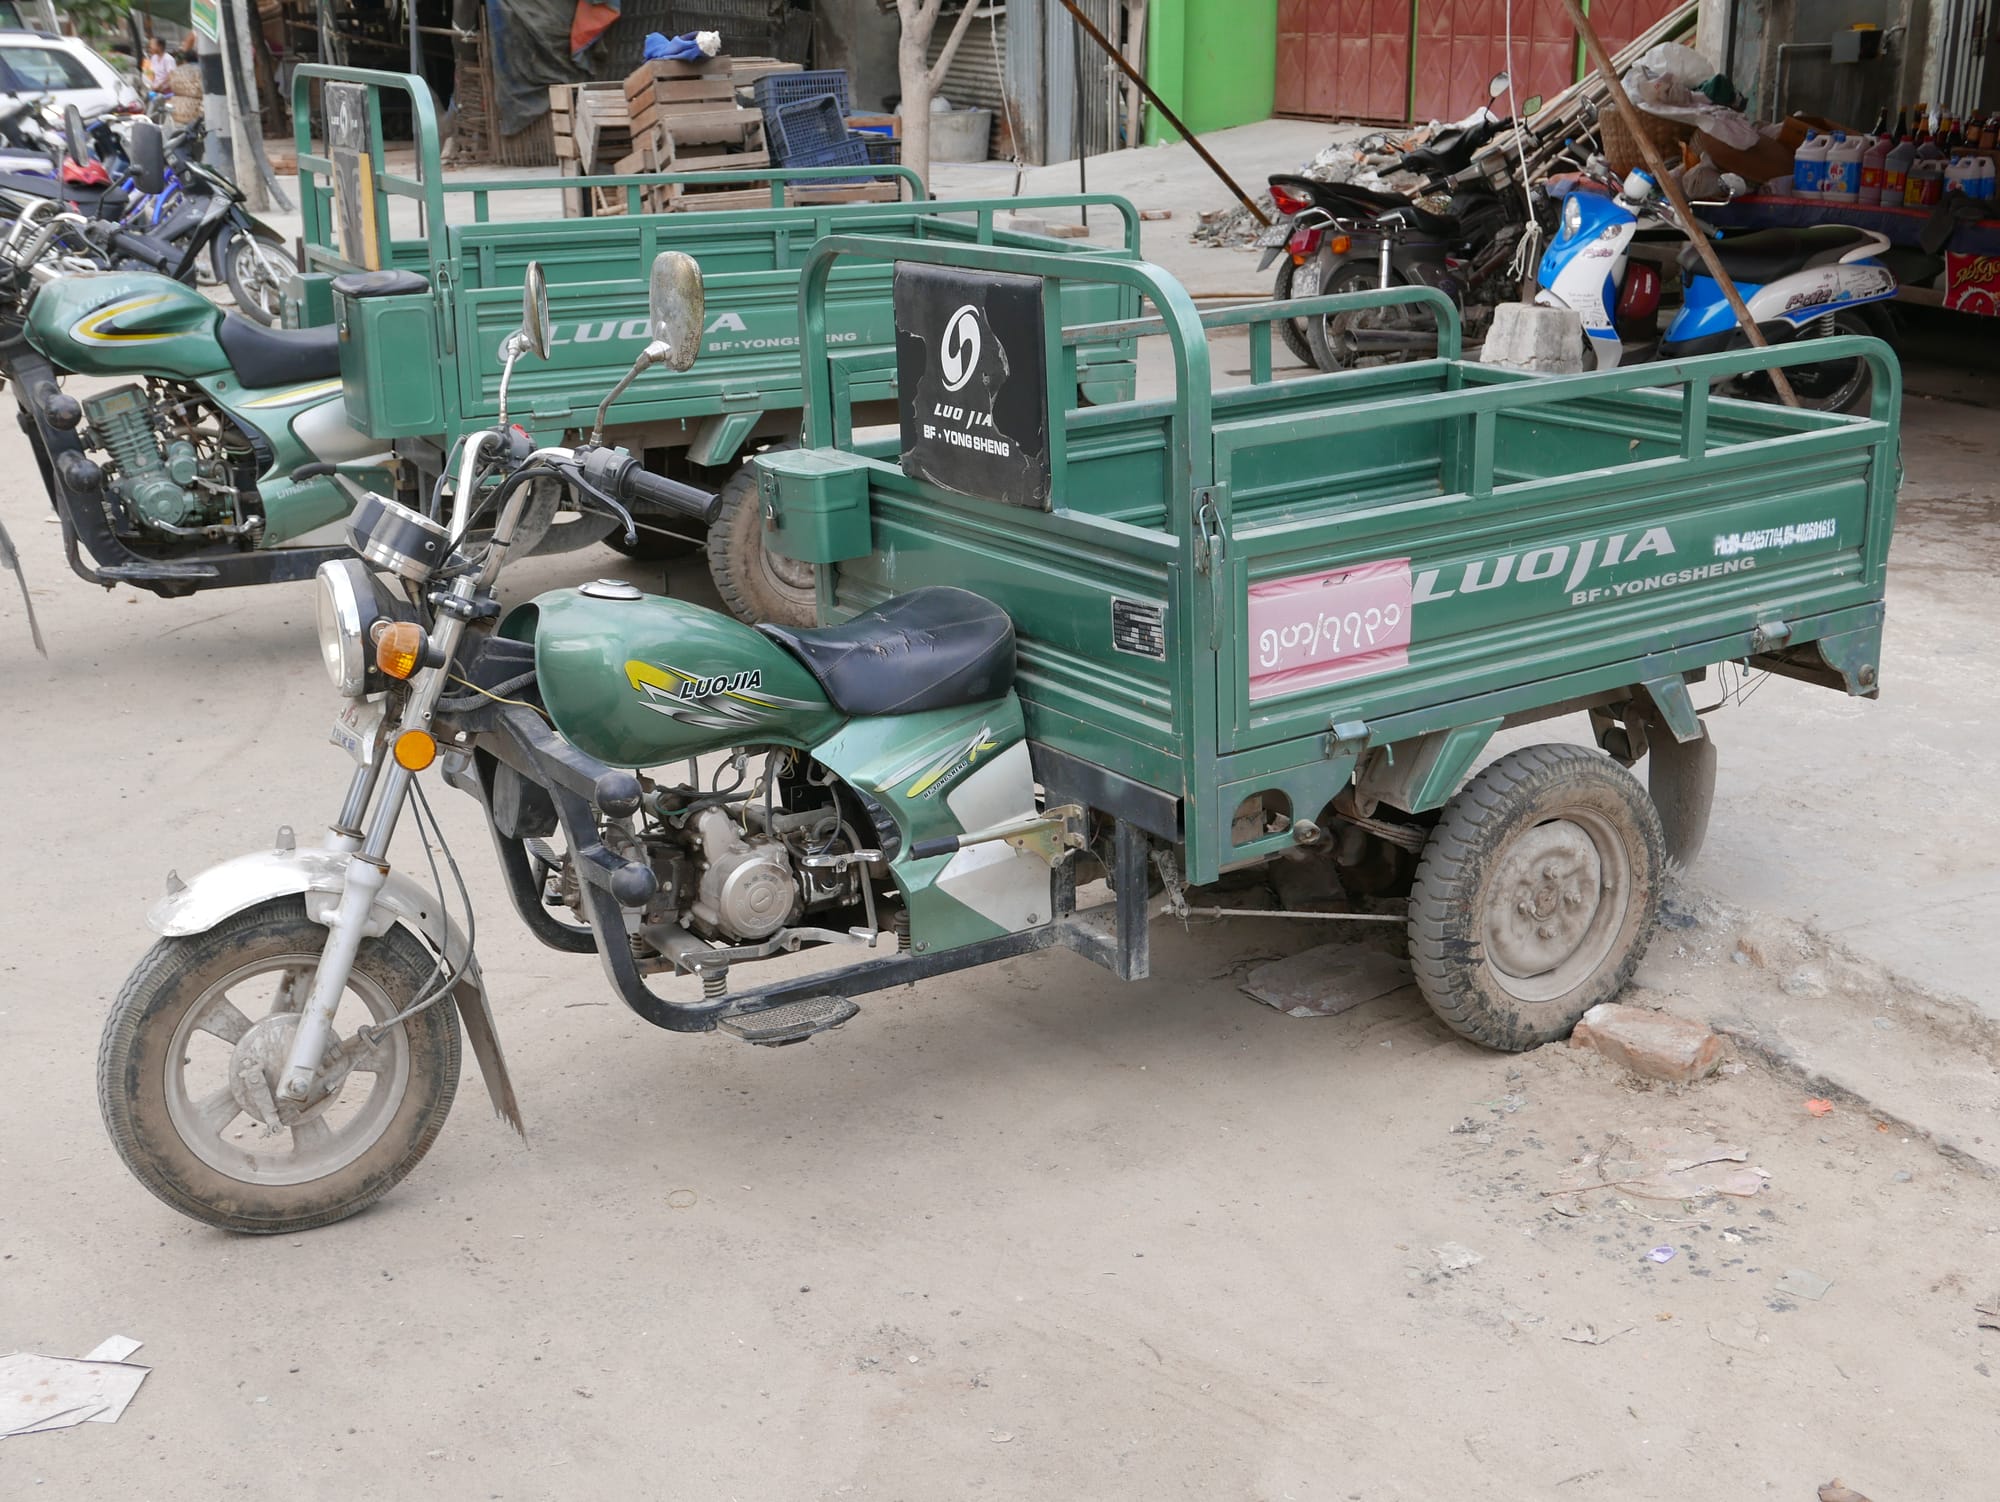 Photo by Author — this is what you get when a motorbike and a small truck love each other very much